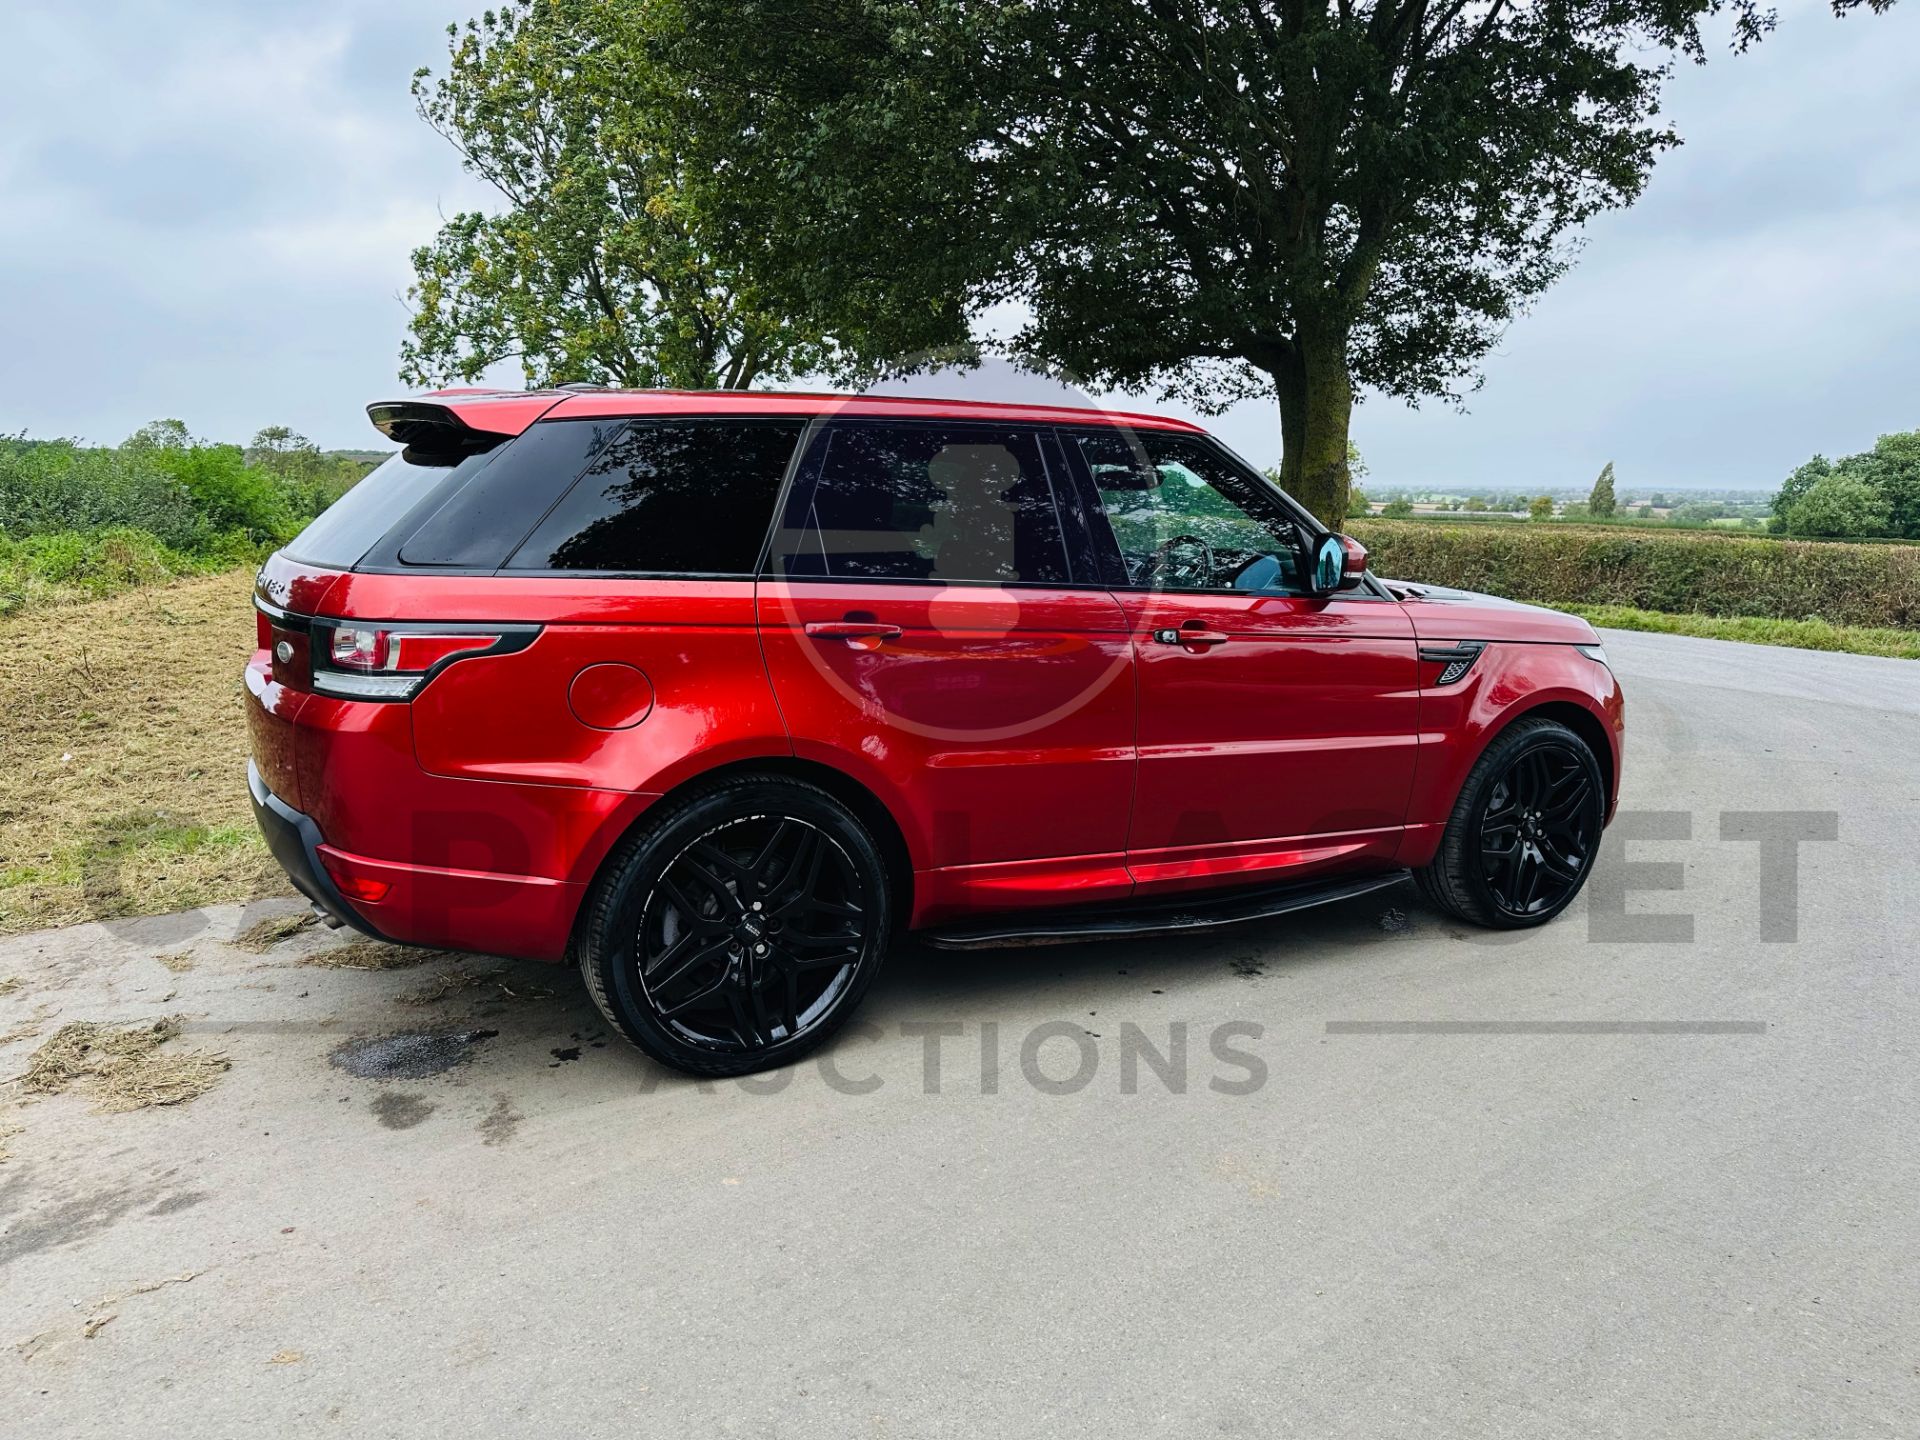 (On Sale) RANGE ROVER SPORT *HSE EDTION* 7 SEATER SUV (2014) 3.0 SDV6 - 8 SPEED AUTOMATIC (NO VAT) - Image 10 of 35